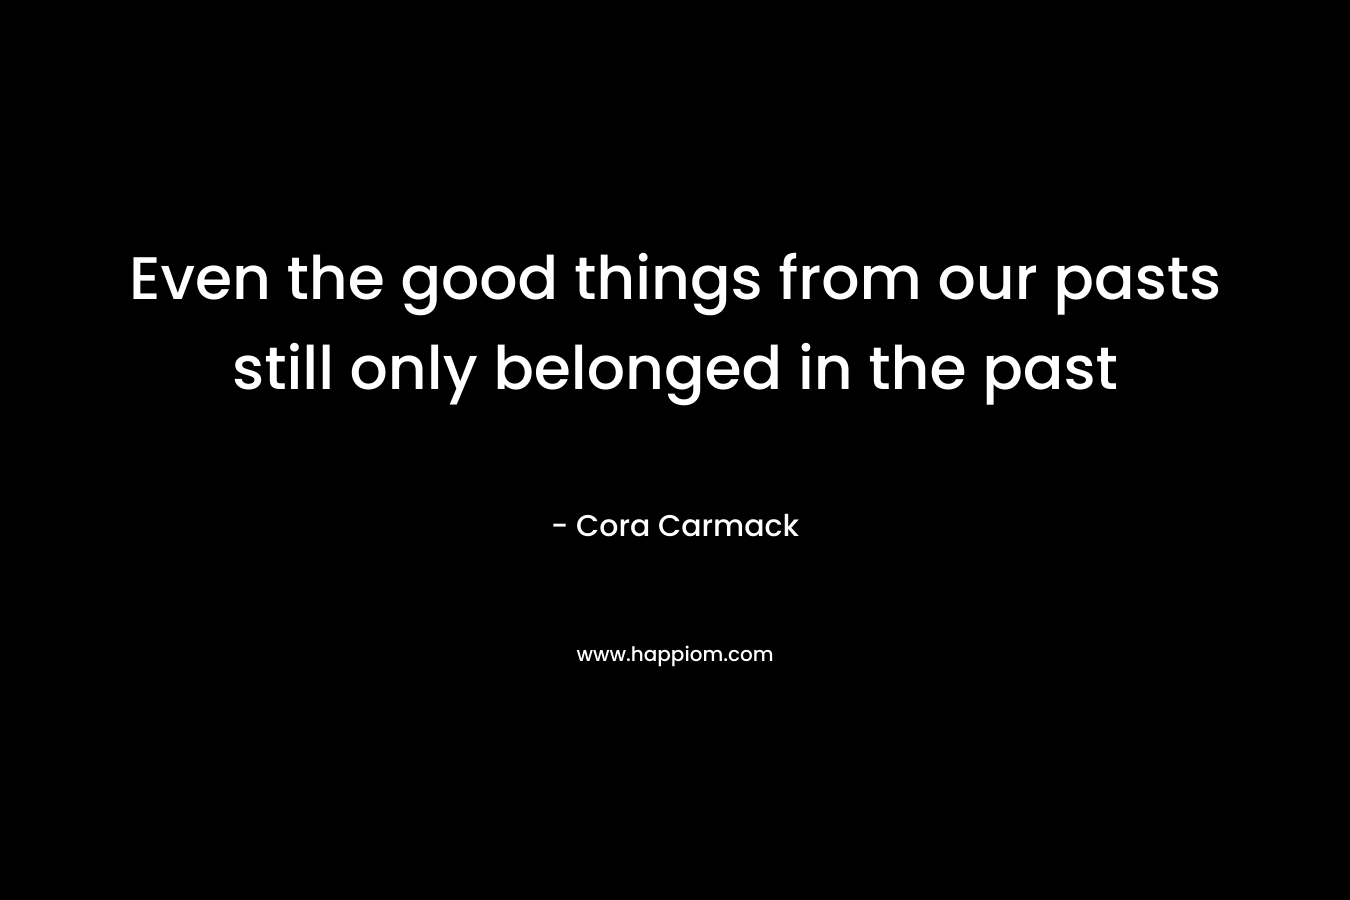 Even the good things from our pasts still only belonged in the past – Cora Carmack